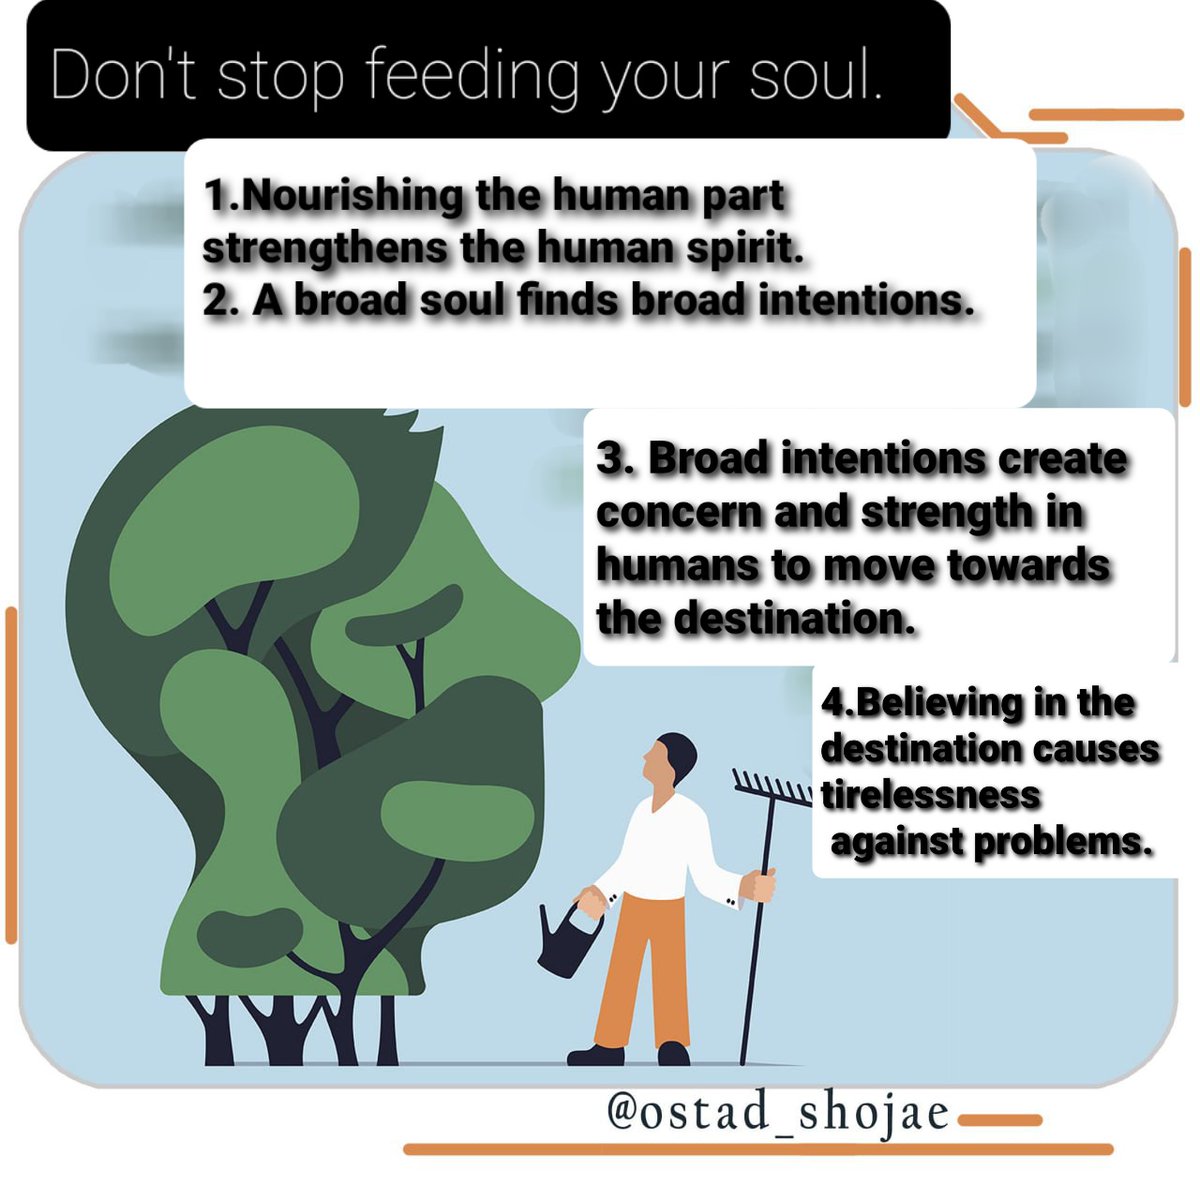 Feeding your soul is as important as Feeding your body...
#tuesdaymotivations
#selfknowledge